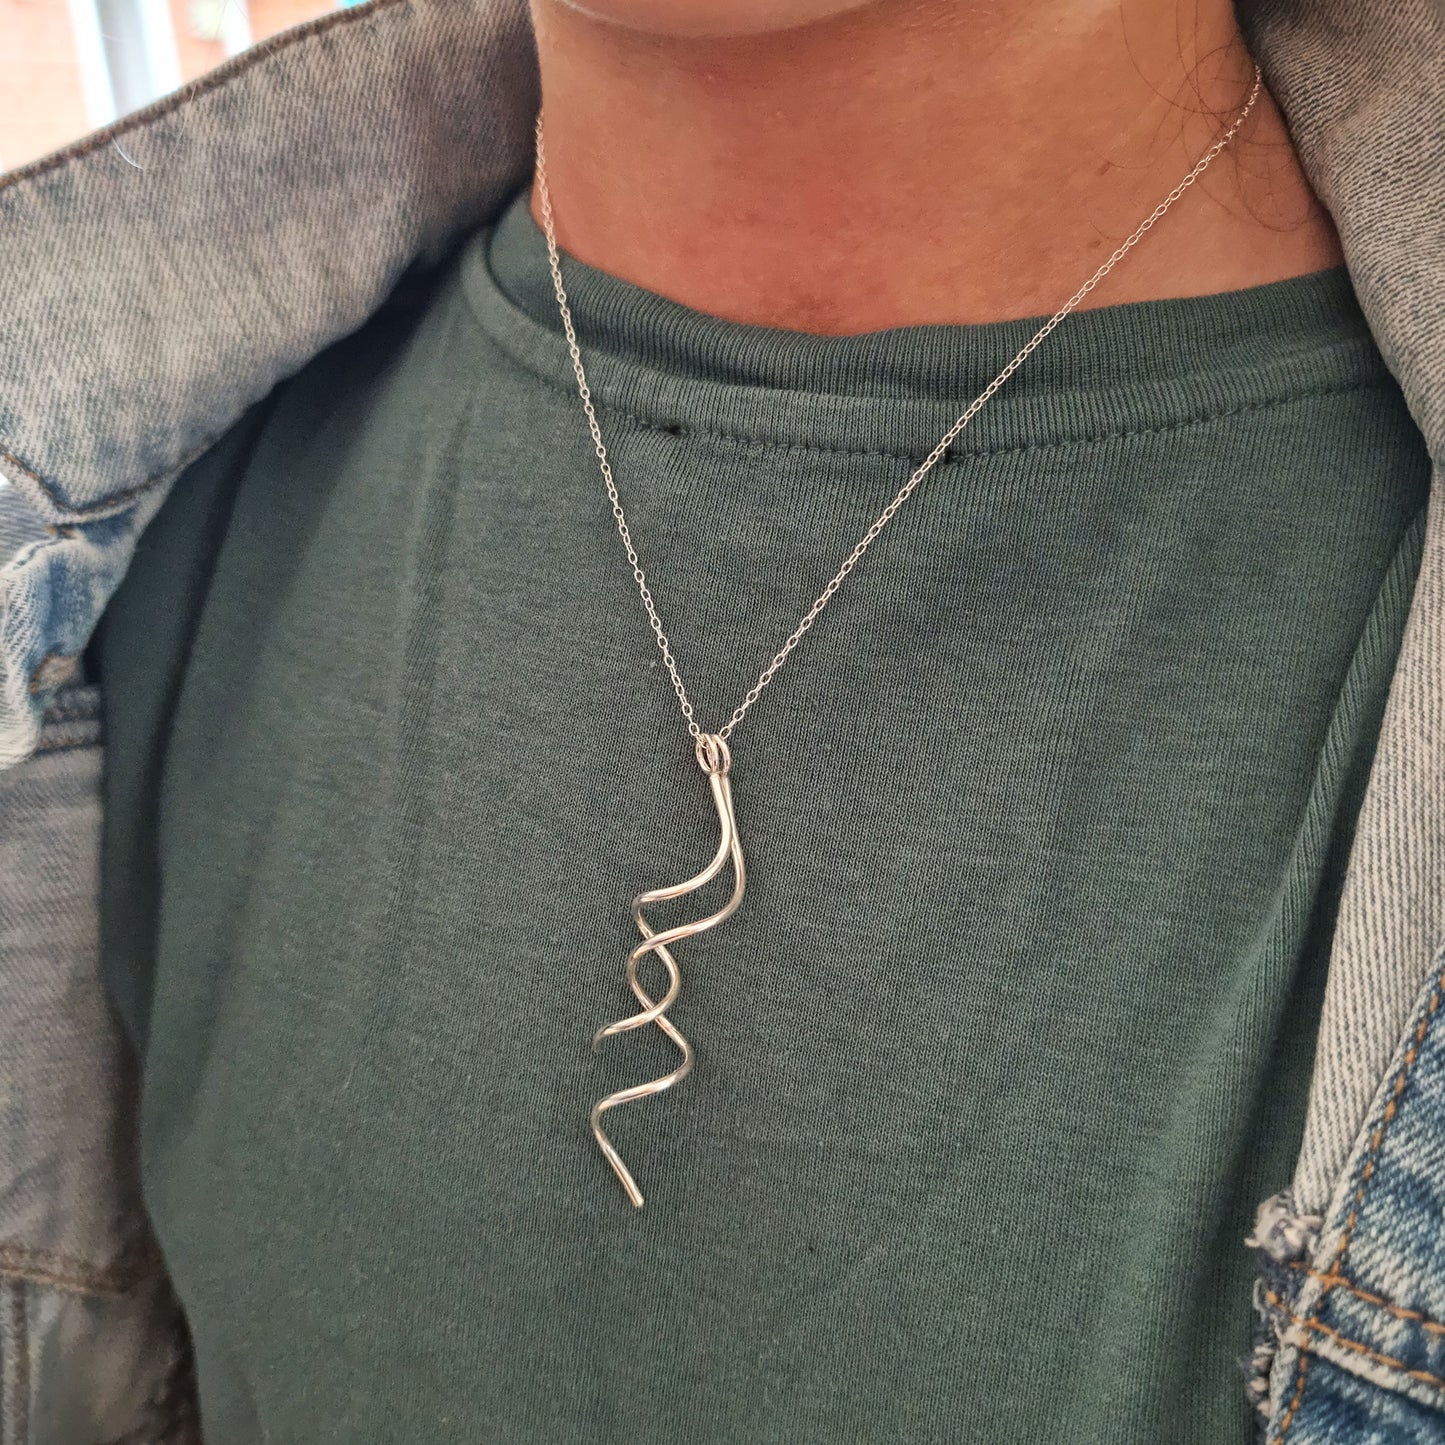 A silver twist pendant with 2 strands intertwined suspended from a silver chain. Pictured being worn.